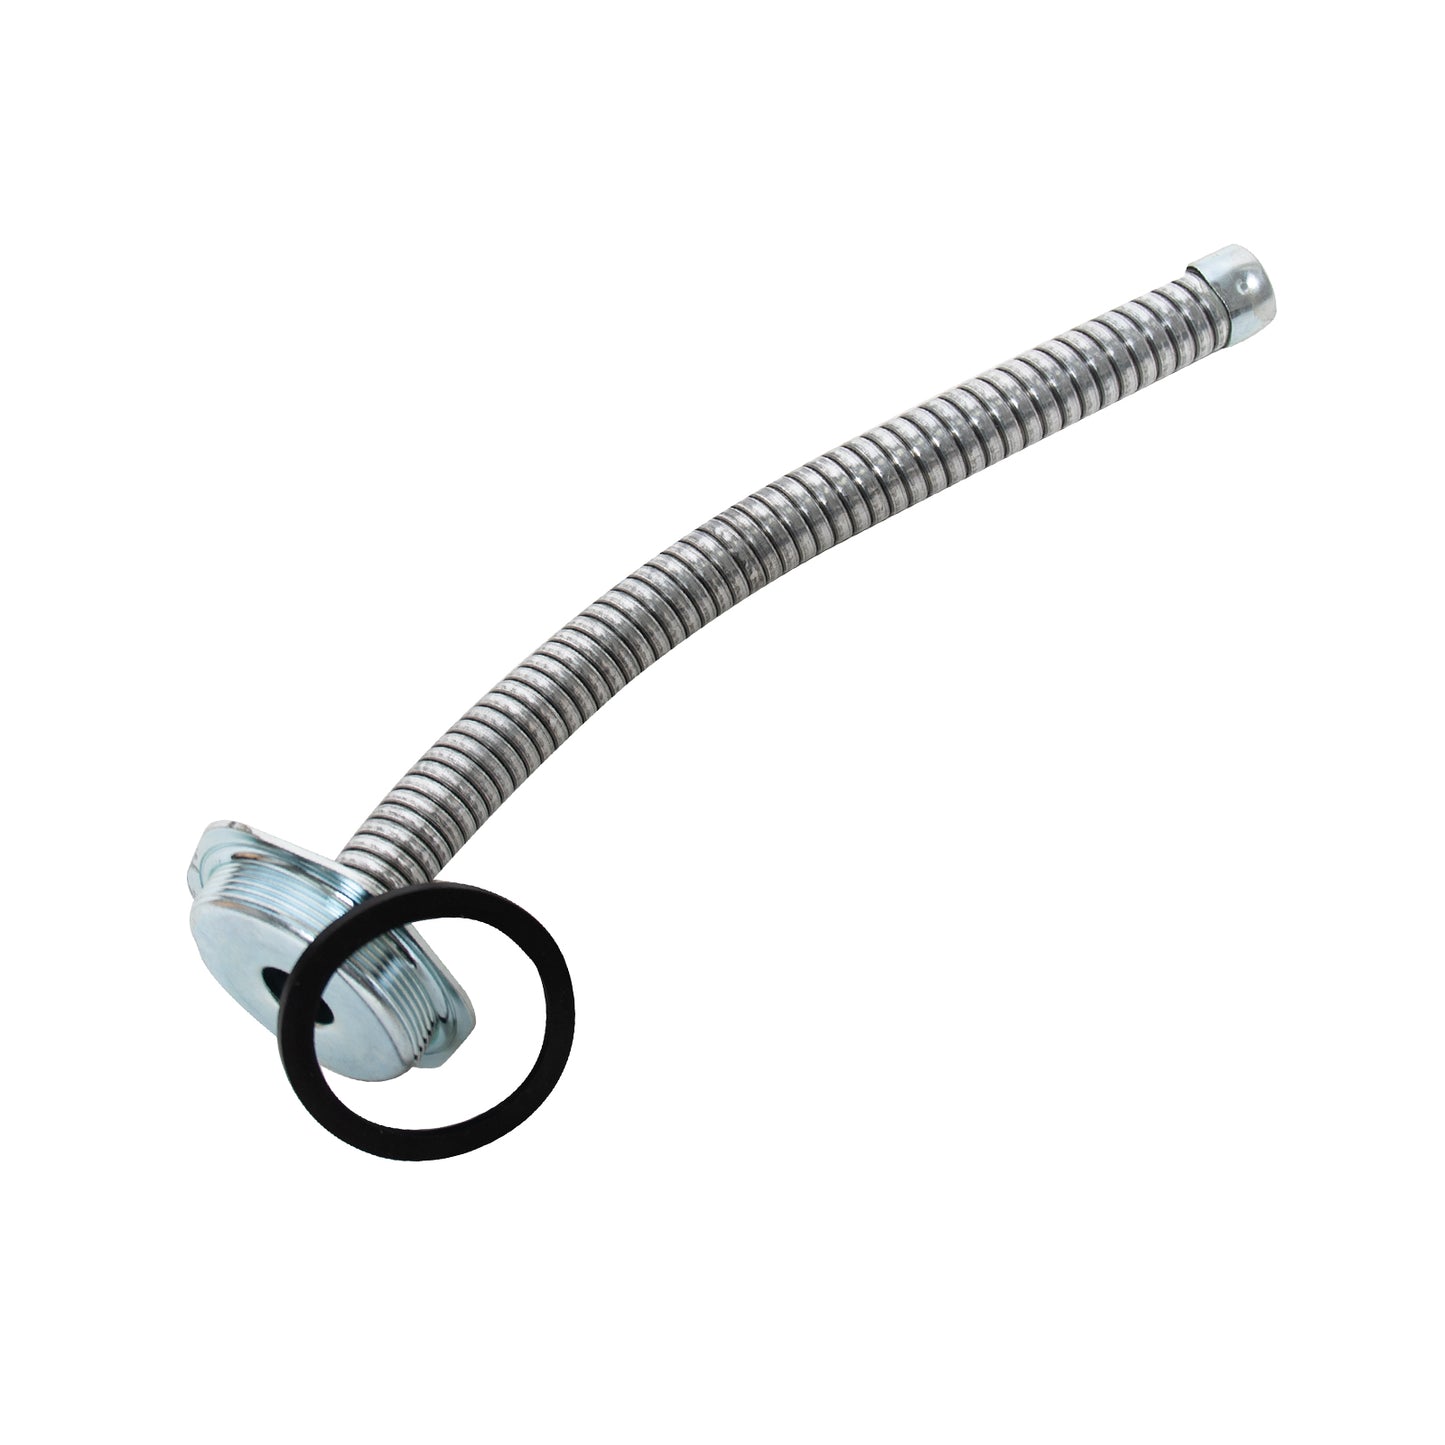 G.I. Type Unleaded Gas Nozzle - Rothco Unleaded Steel Screw-On Gas Nozzle